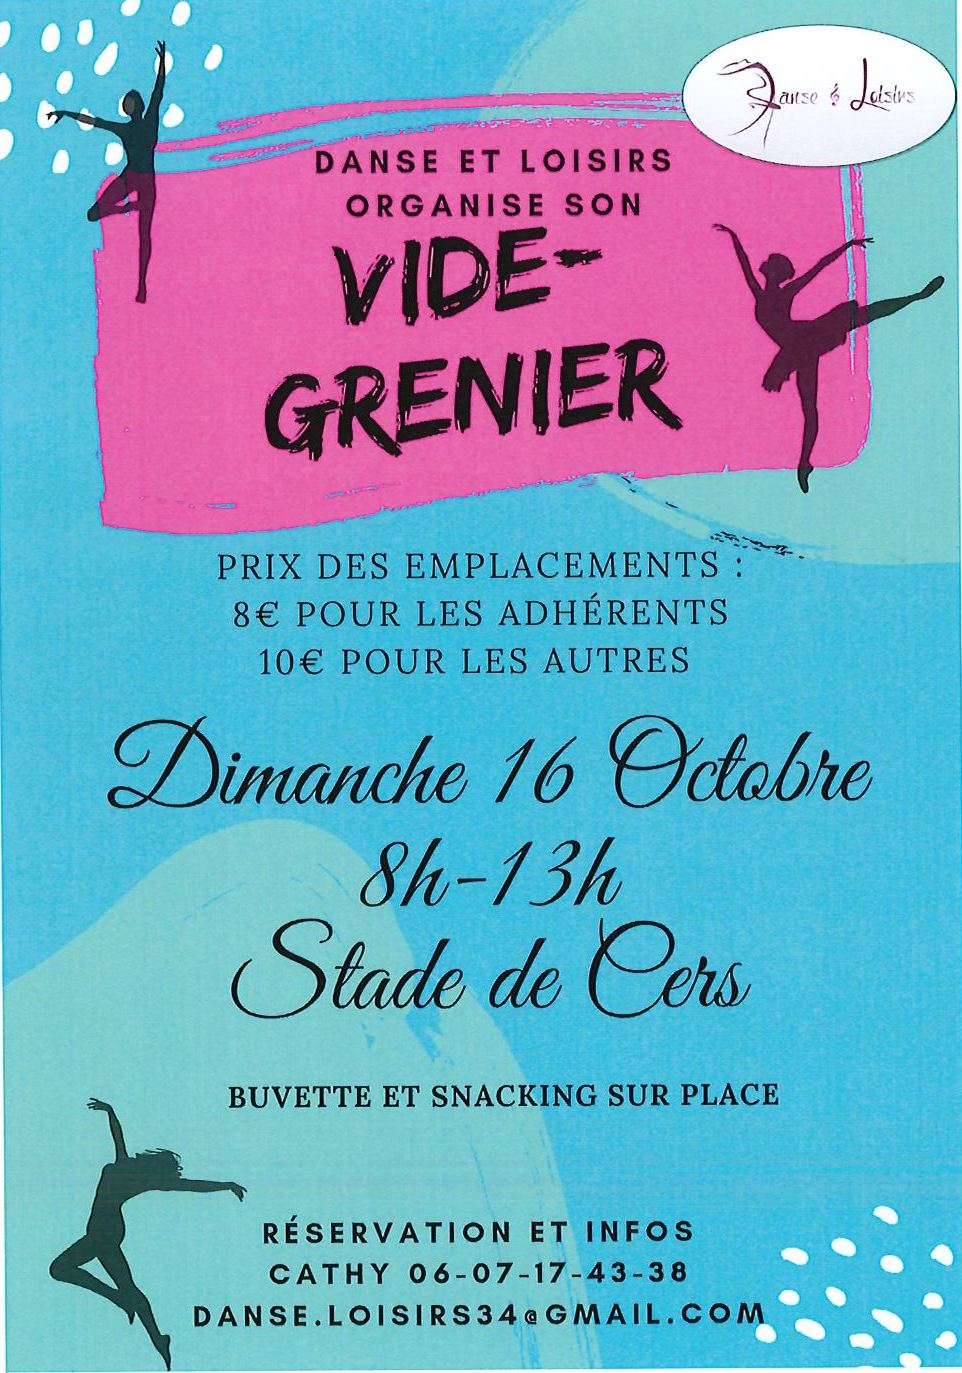 You are currently viewing Danse et Loisirs organise son vide grenier le 16 octobre